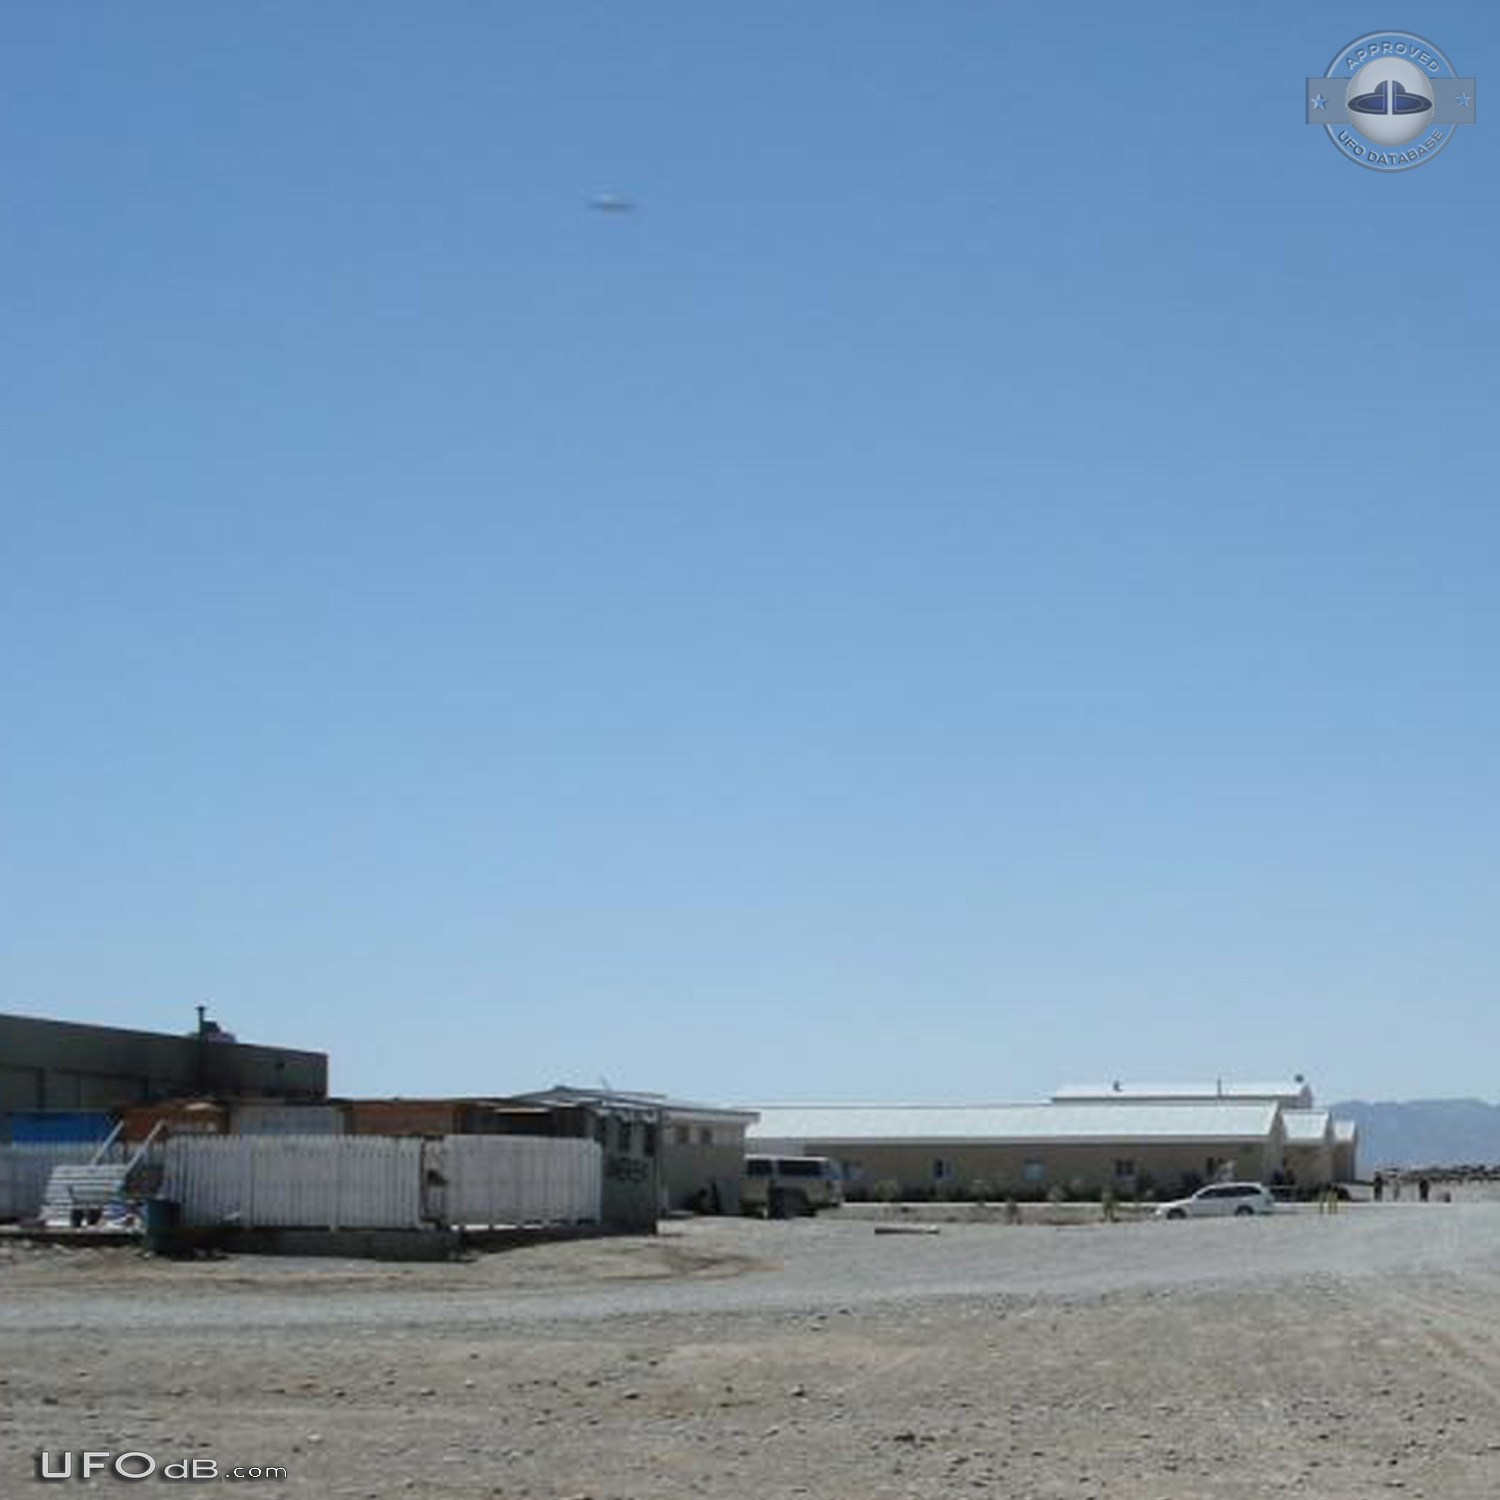 Object captured when taking photo at NATO base site Kandahar Afghanist UFO Picture #748-3